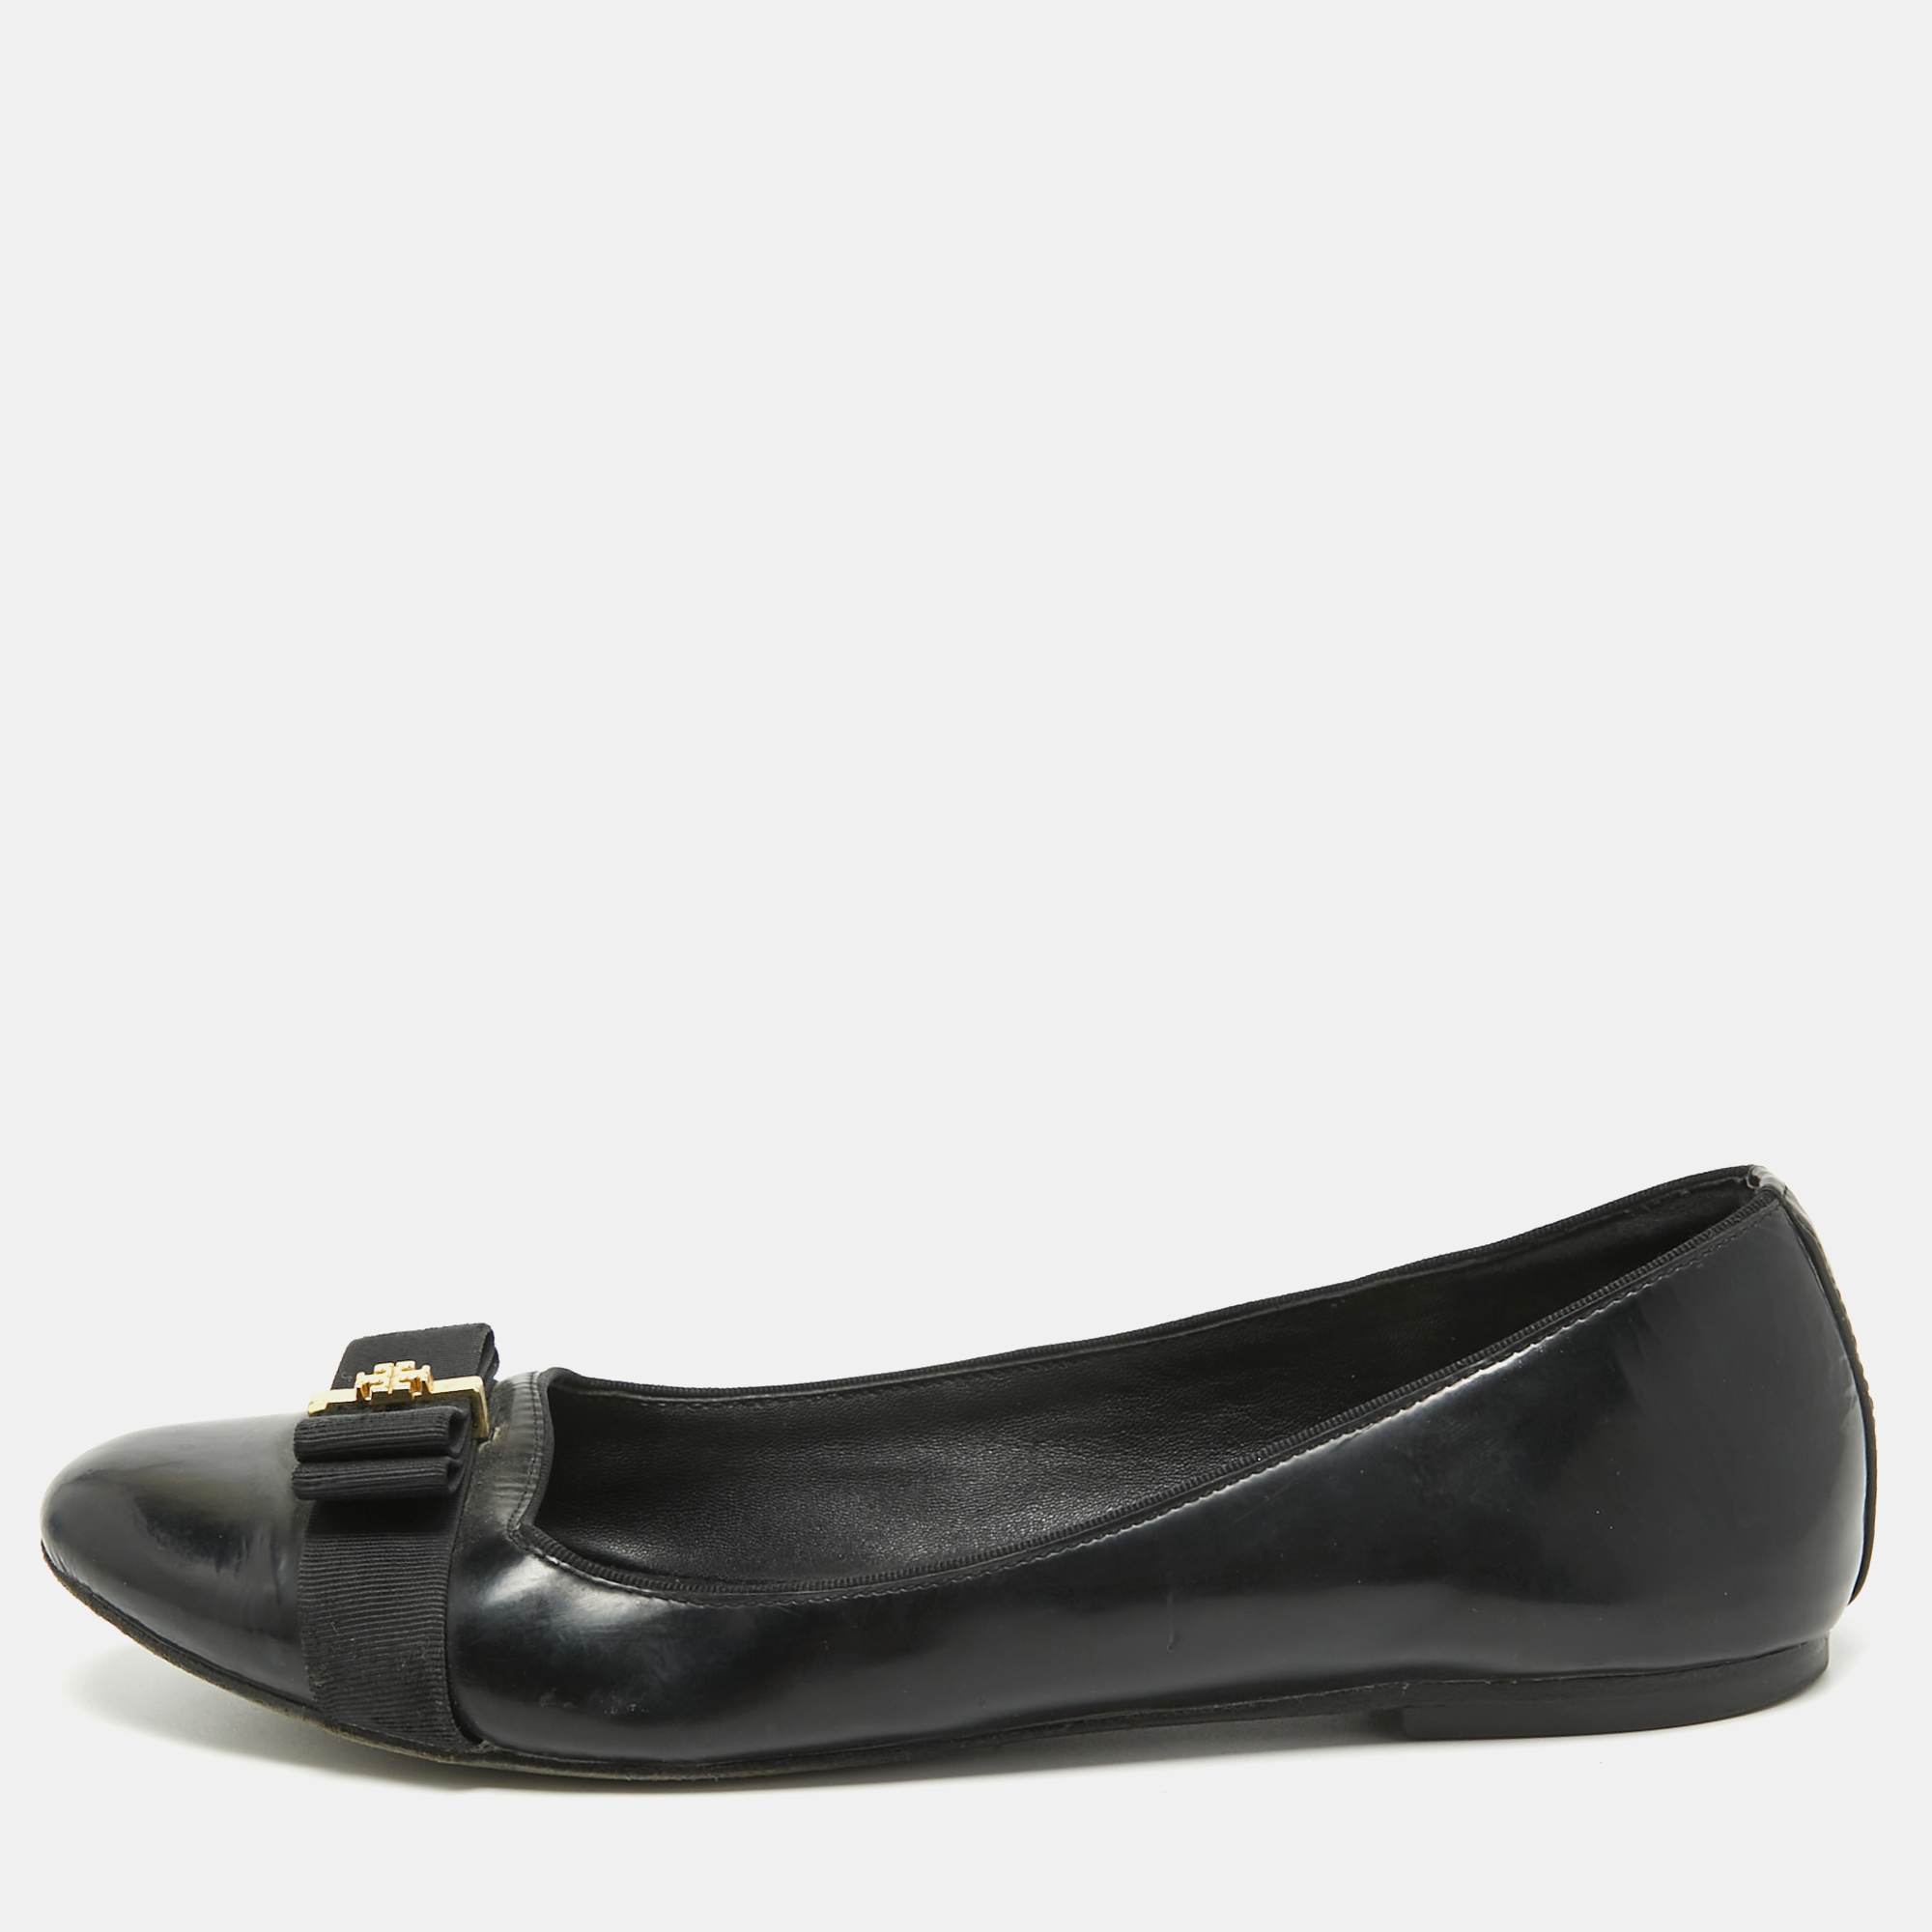 

Tory Burch Black Patent Leather Bow Ballet Flats Size